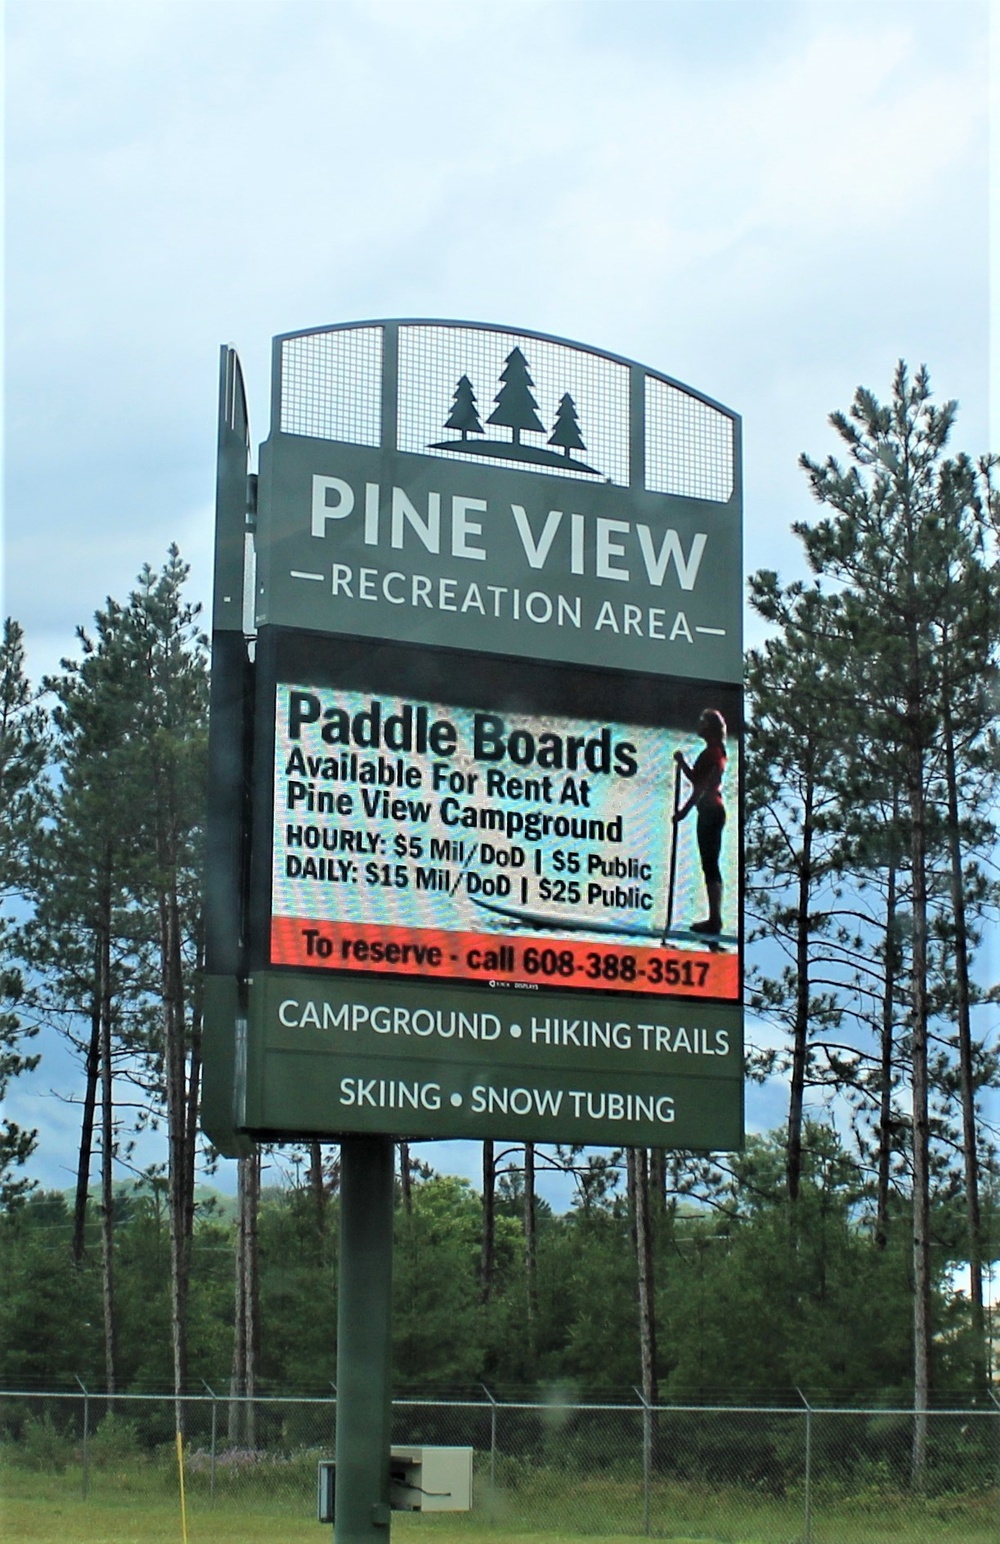 Fort McCoy's Pine View Recreation Area